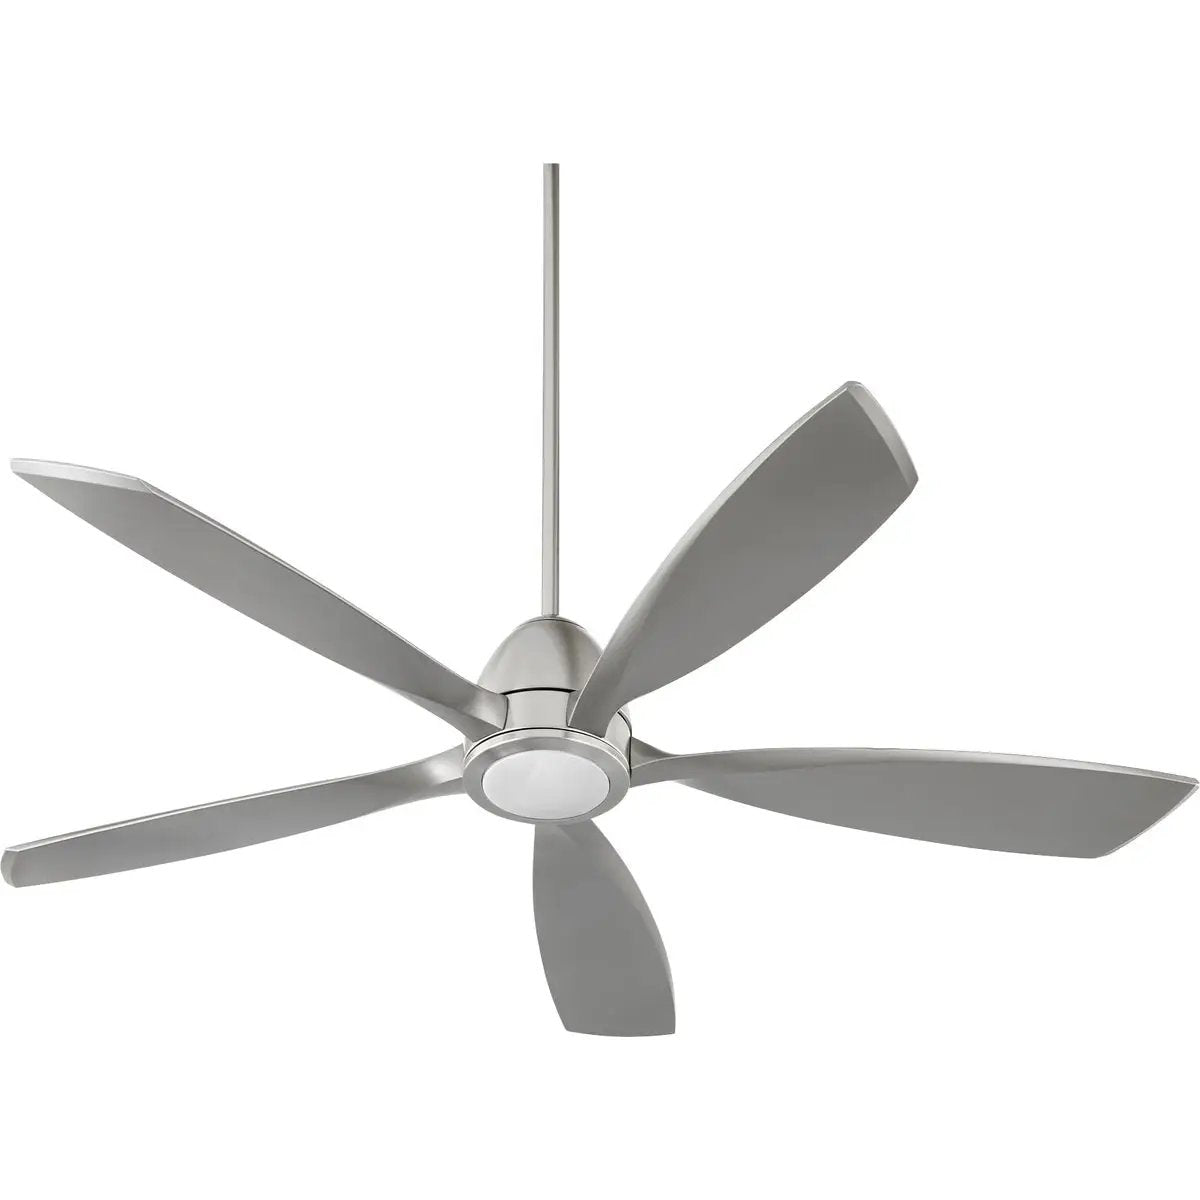 A contemporary ceiling fan with a gentle twist design and 56-inch blades. Features a 6-speed DC motor, integrated LED lighting, and a 16-degree blade pitch.